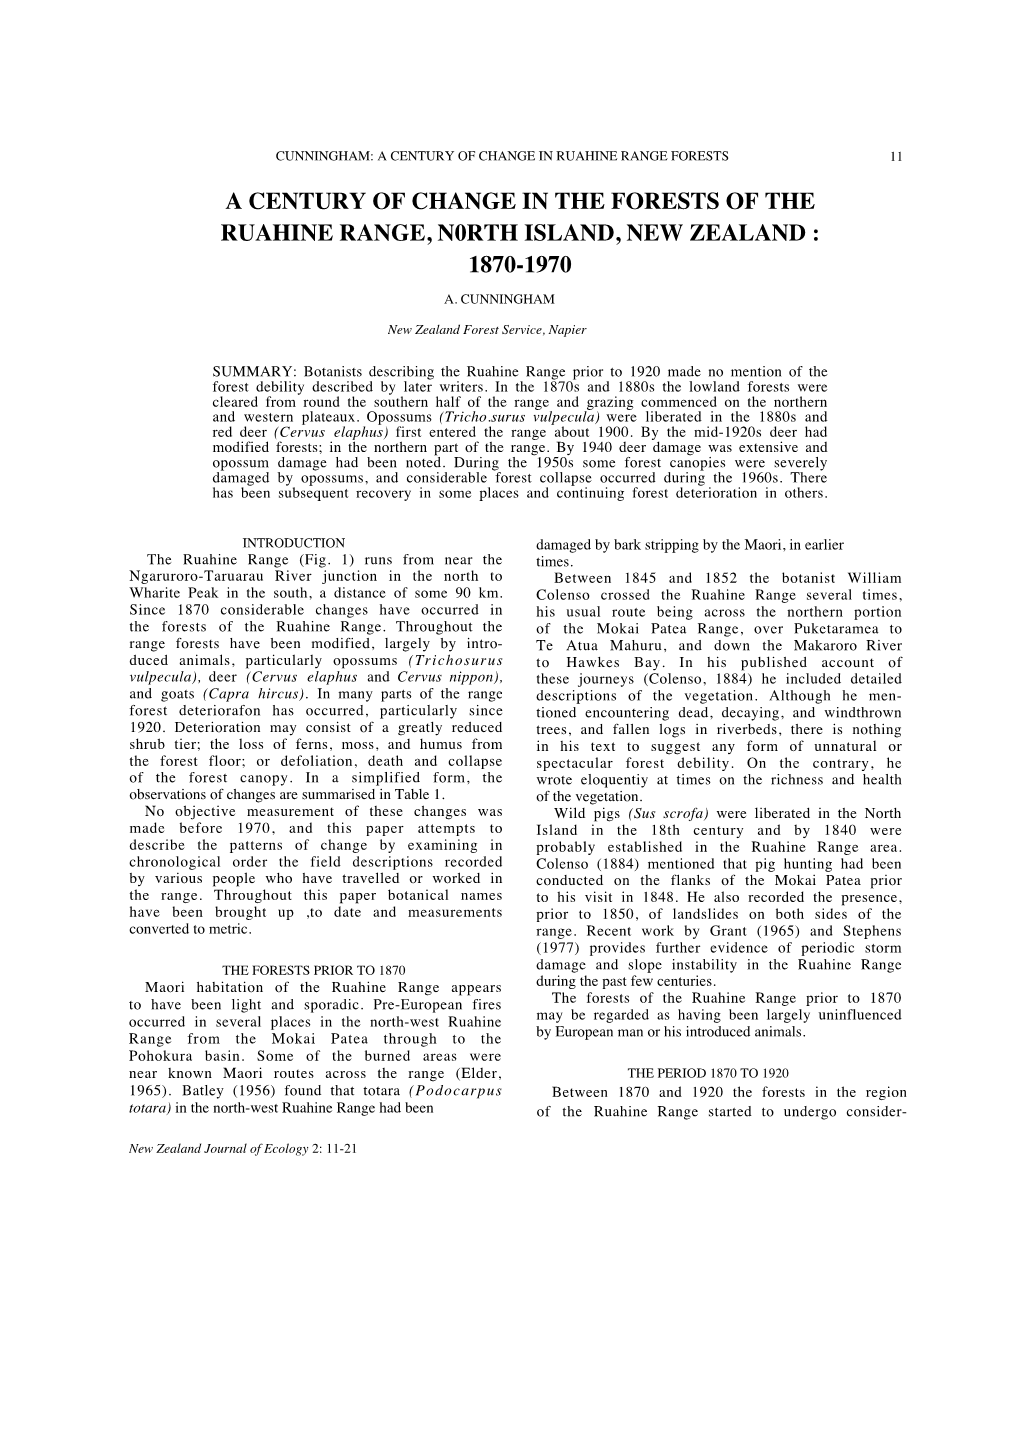 A Century of Change in the Forests of the Ruahine Range, N0rth Island, New Zealand : 1870-1970